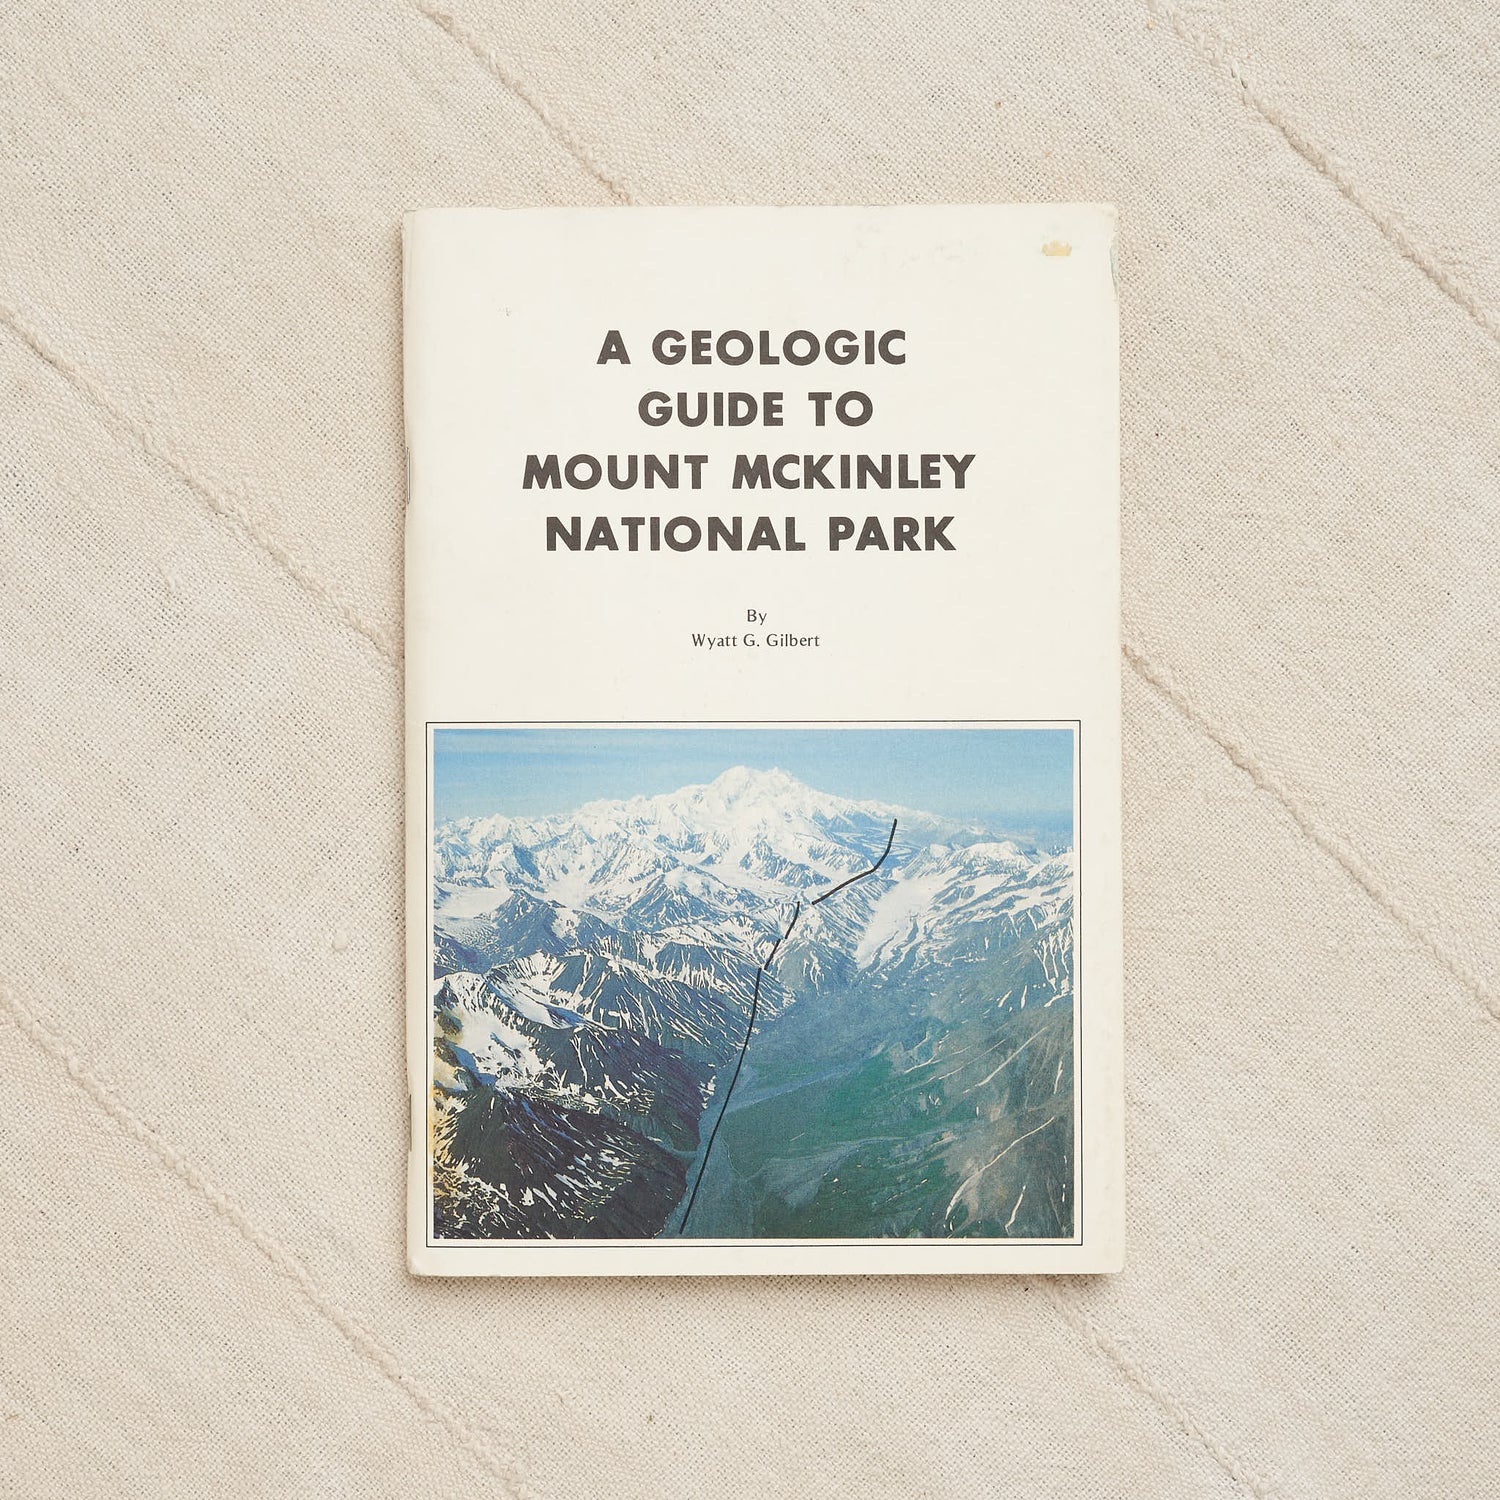 A Geologic Guide to Mount McKinley National Park